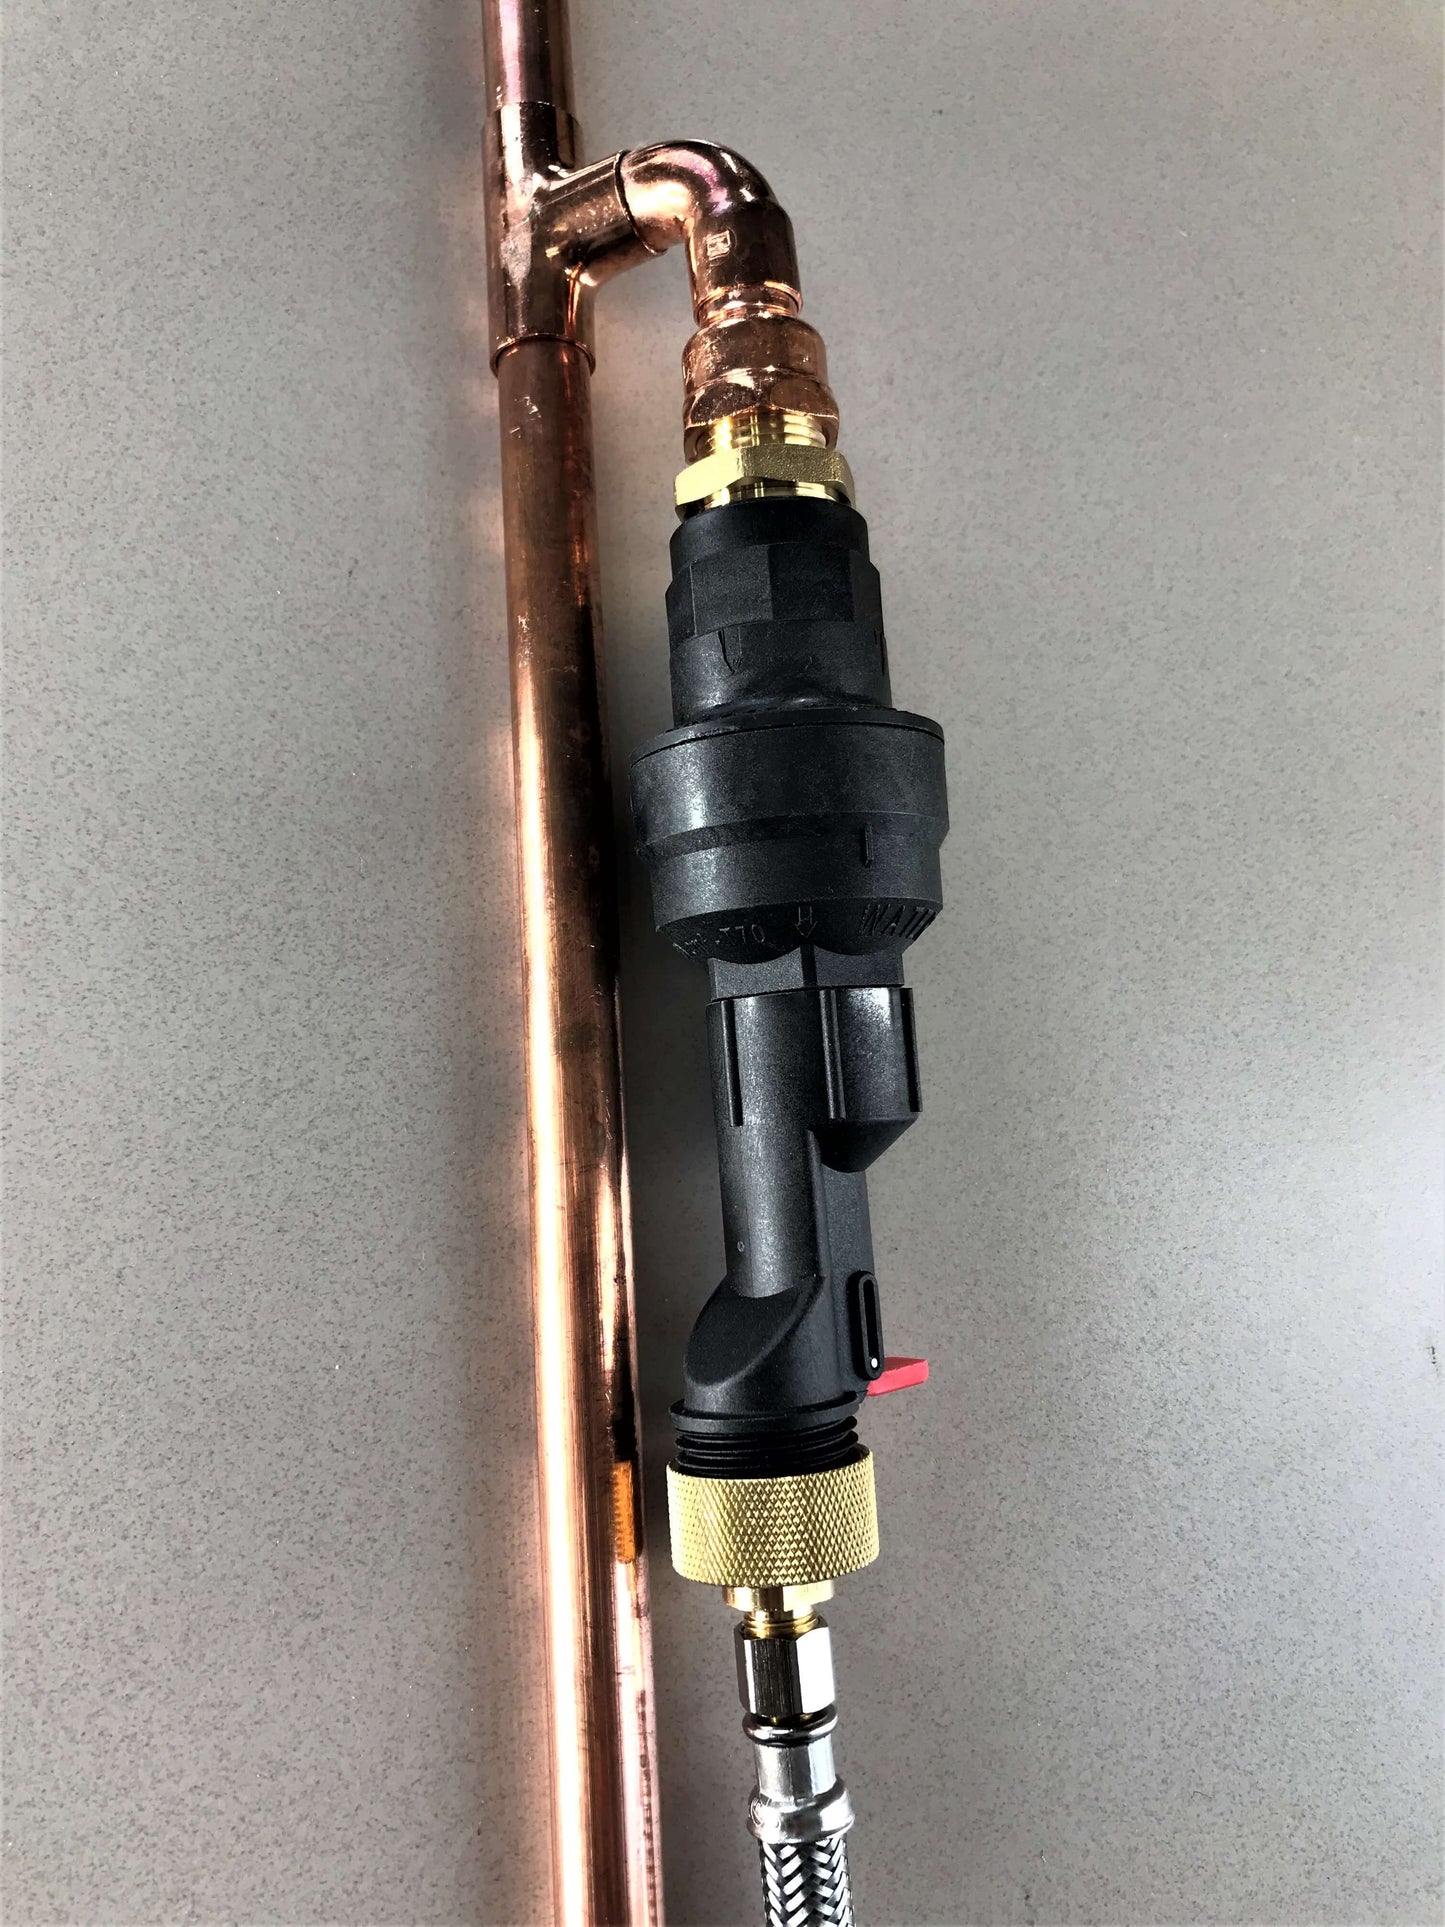 Water Block connected to a copper pipe and 1/4" stainless steel braided water hose.